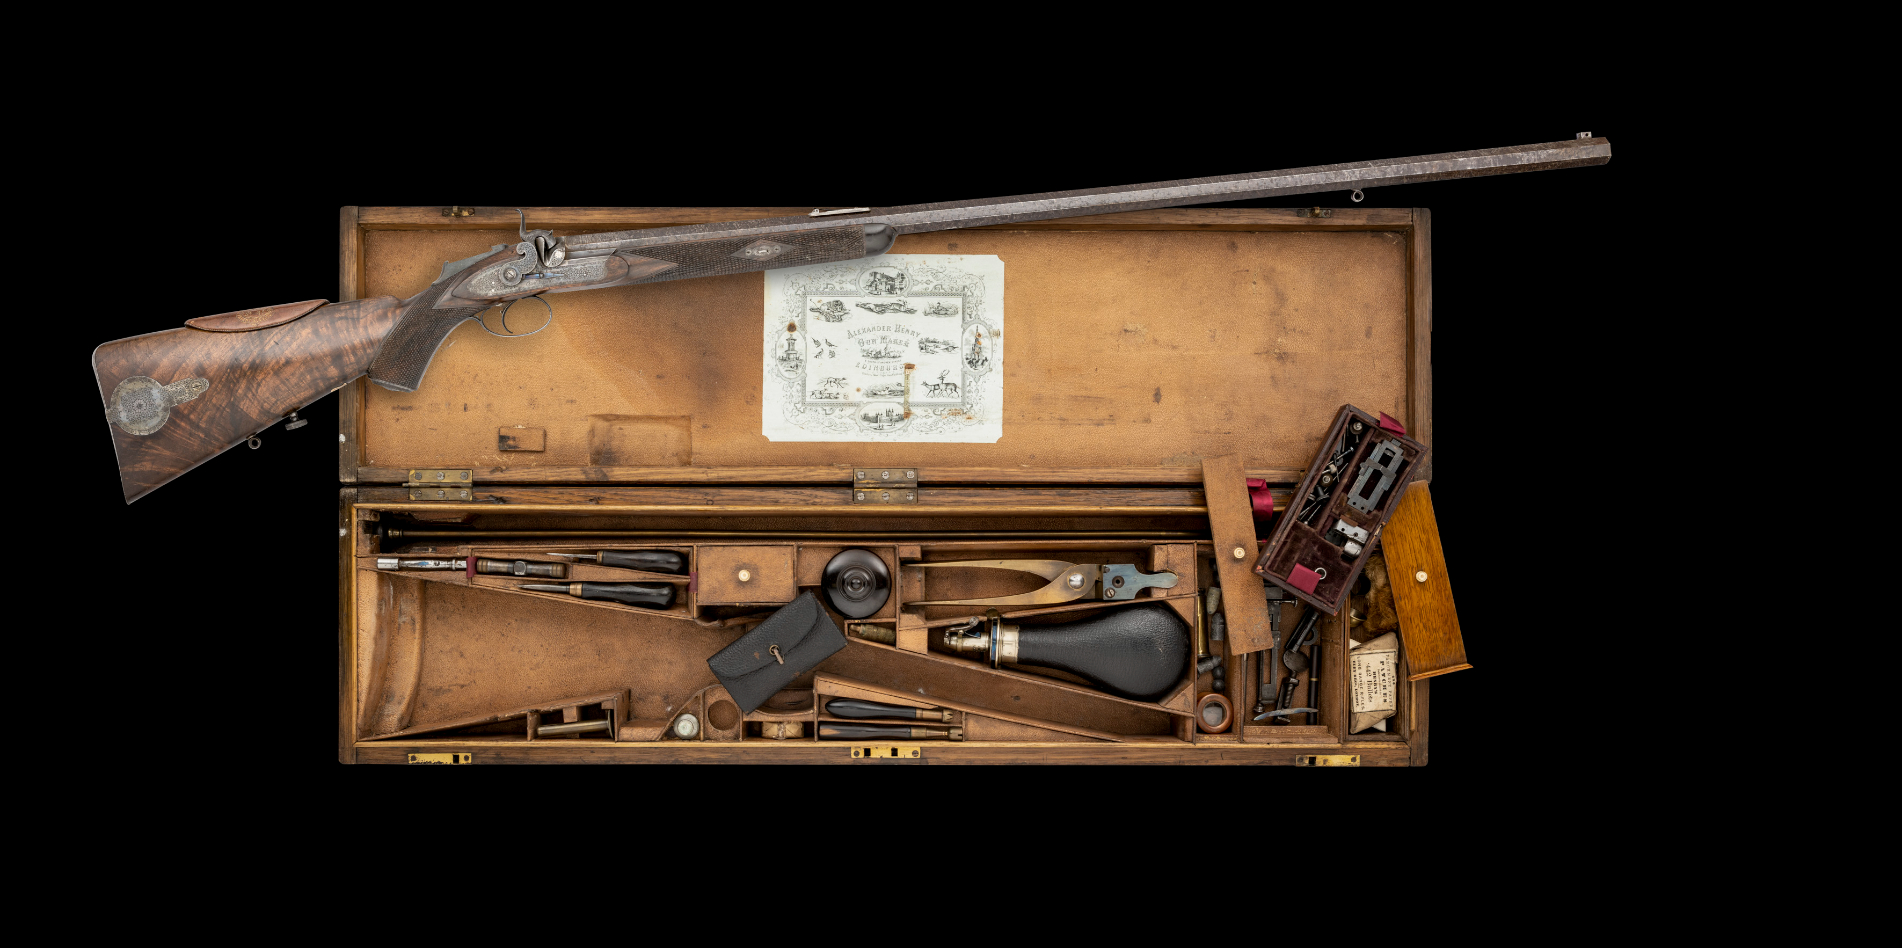 THE FINE CASED SCOTTISH .451 CALIBRE ALEXANDER HENRY PATENT PERCUSSION RIFLE FOR SPORTING AND TARGET - Image 3 of 3